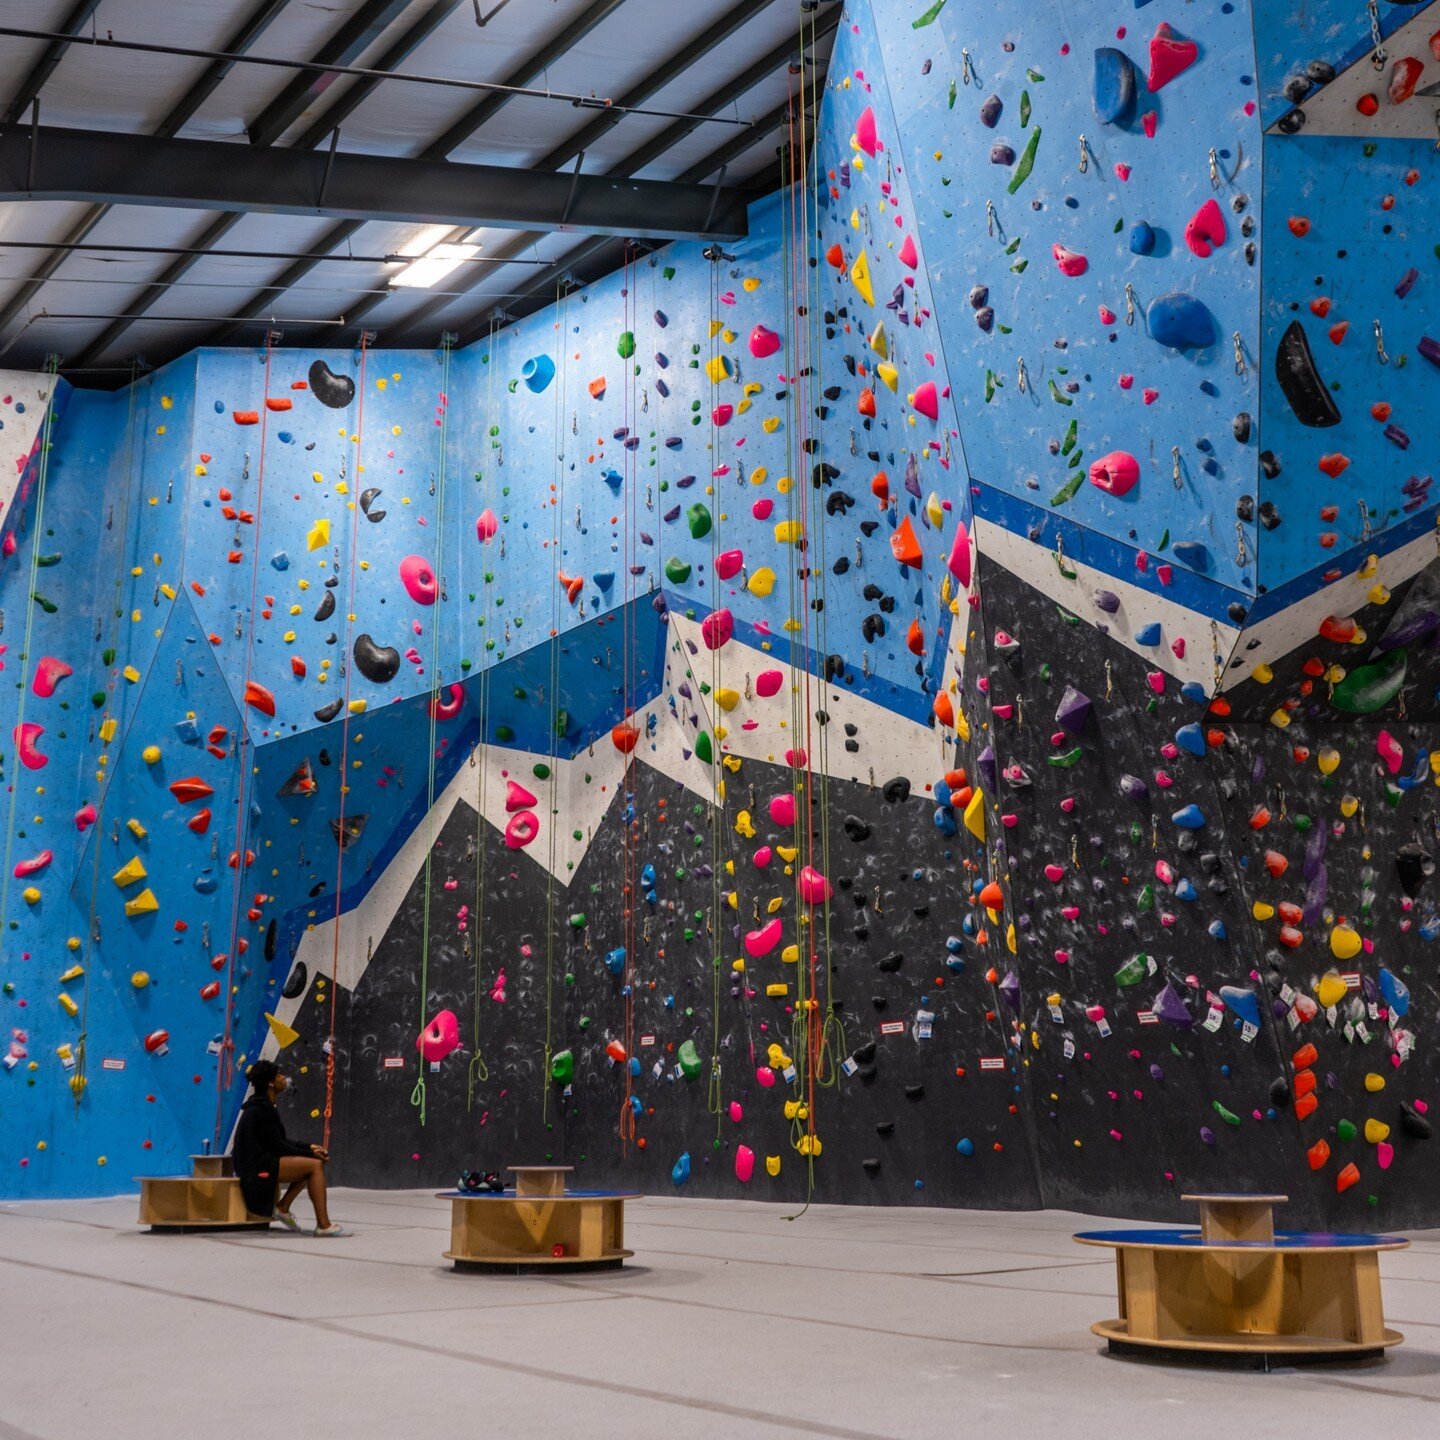 There are ✨NEW ROUTES✨ in The Horseshoe this week! With 19 Routes from 5.6 to 5.13, there's something for everyone to come try out. Get out of that cold weather and try them out this weekend!

Tell about your project down in the comments! ⬇⬇⬇